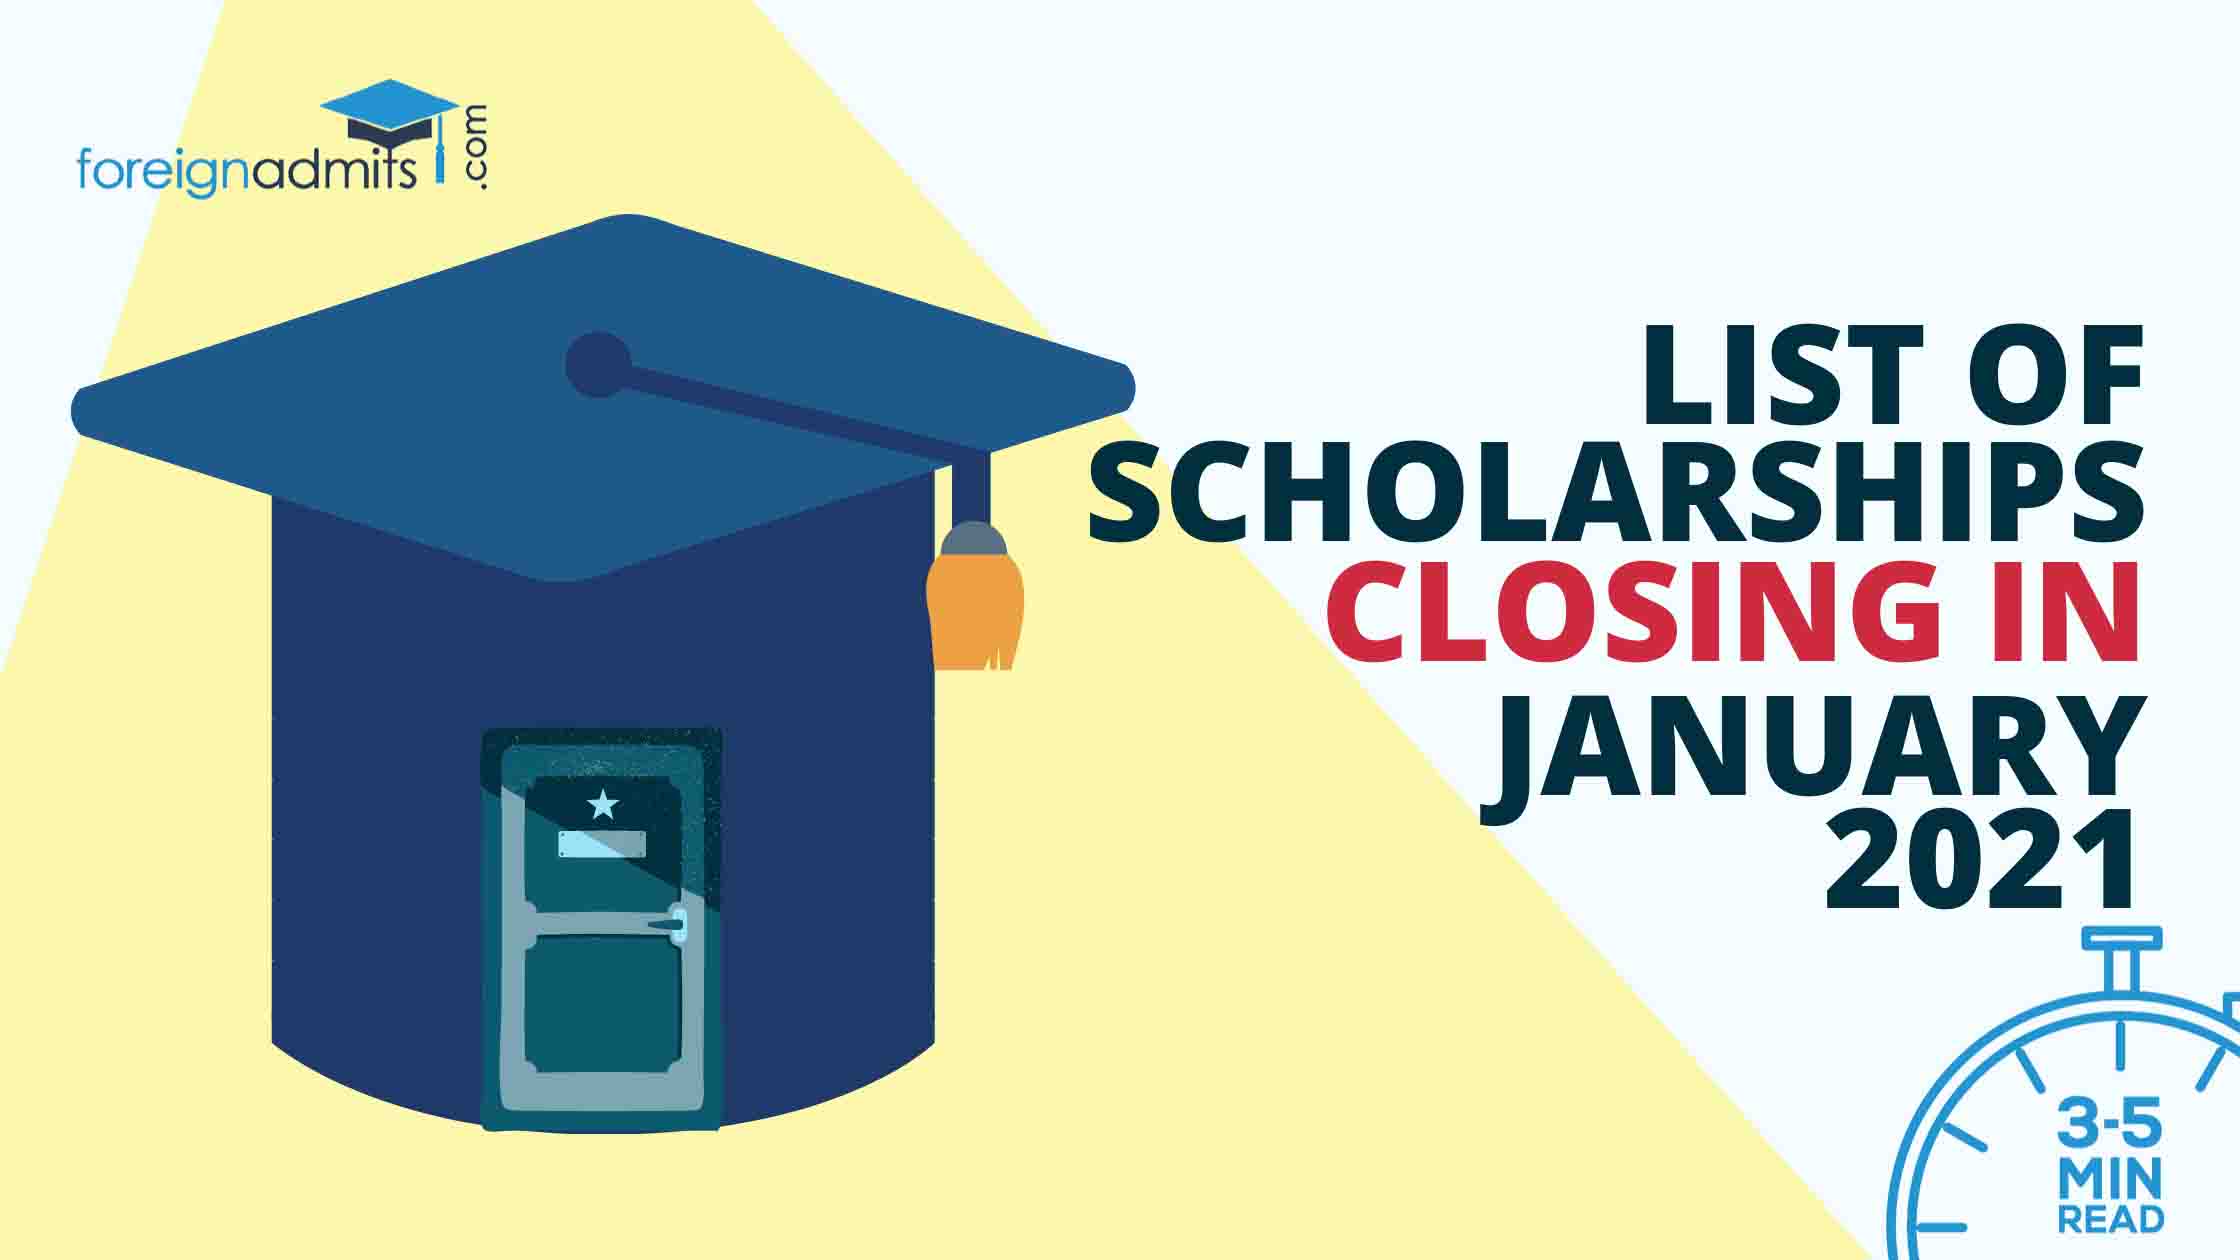 List of Scholarships Closing in January 2021